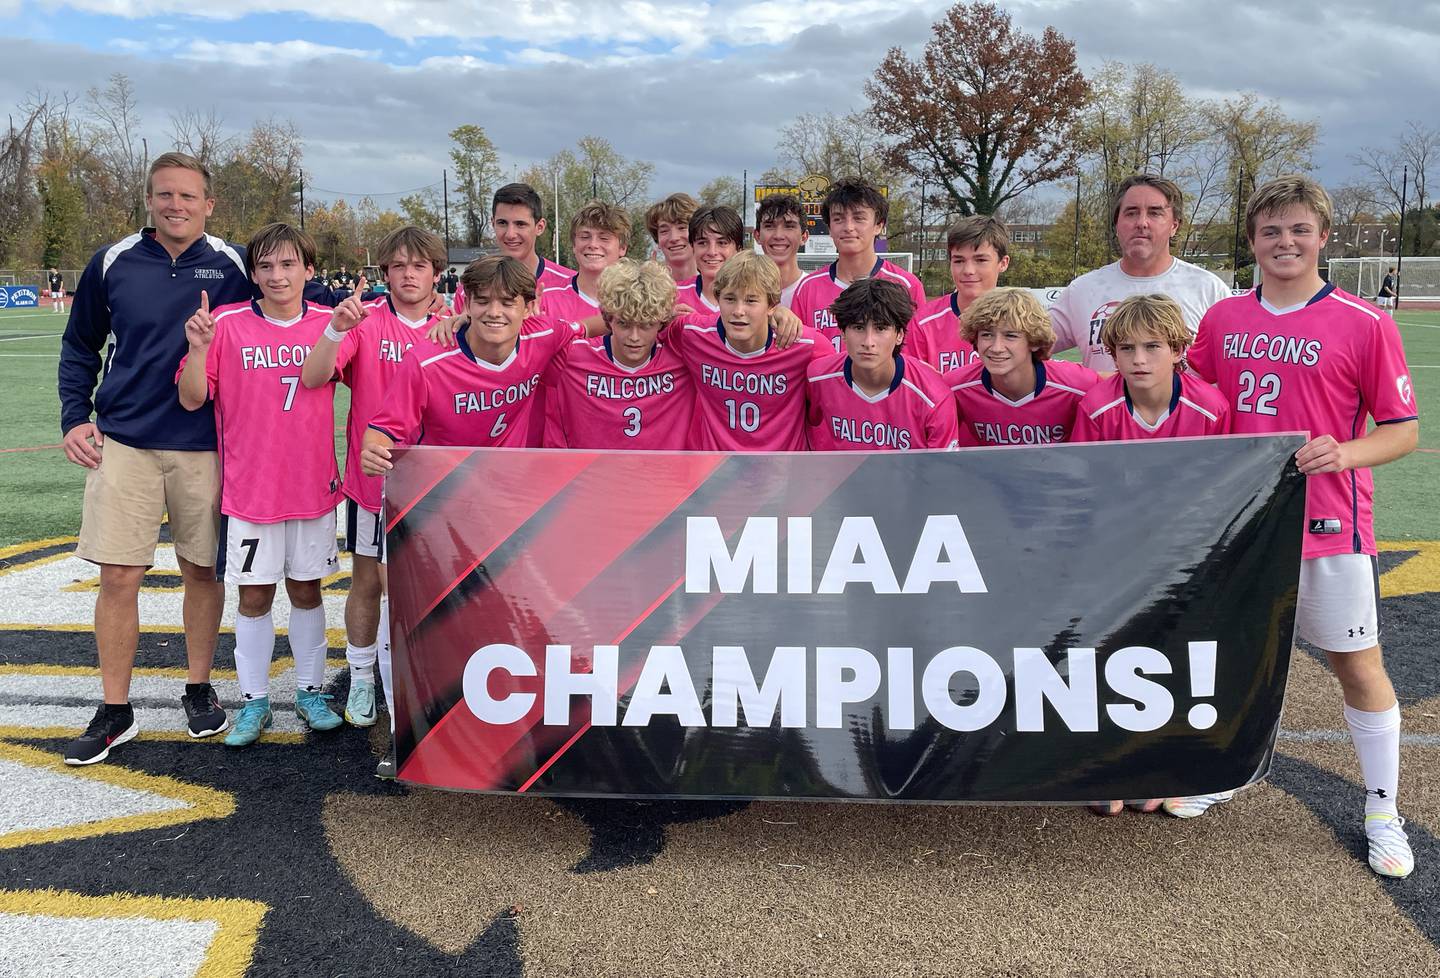 Gerstell Academy bounced back from a loss to St. Vincent Pallotti in last year's MIAA C Conference championship game, to post and undefeated season capped by a 1-0 victory over the Panthers in this year's title game.